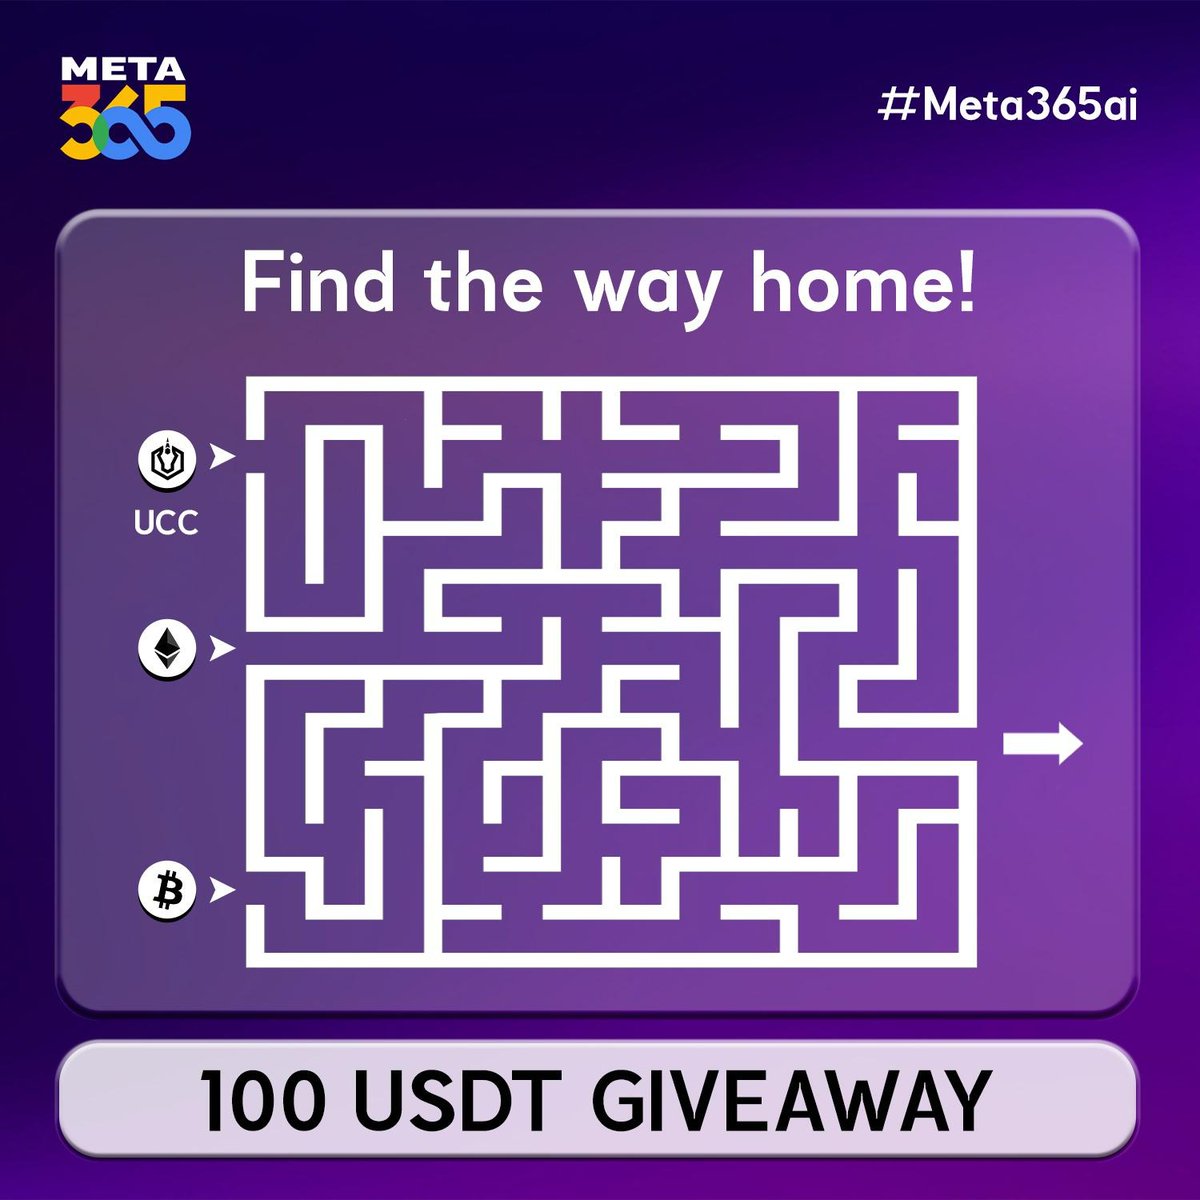 🚨 $100 GIVEAWAY Which coin will find its way home? ✅ Follow @Meta365Ai ✅ RT & tag 3 friends using #UCC 🎁 5 lucky winners will each receive 20 $USDT!